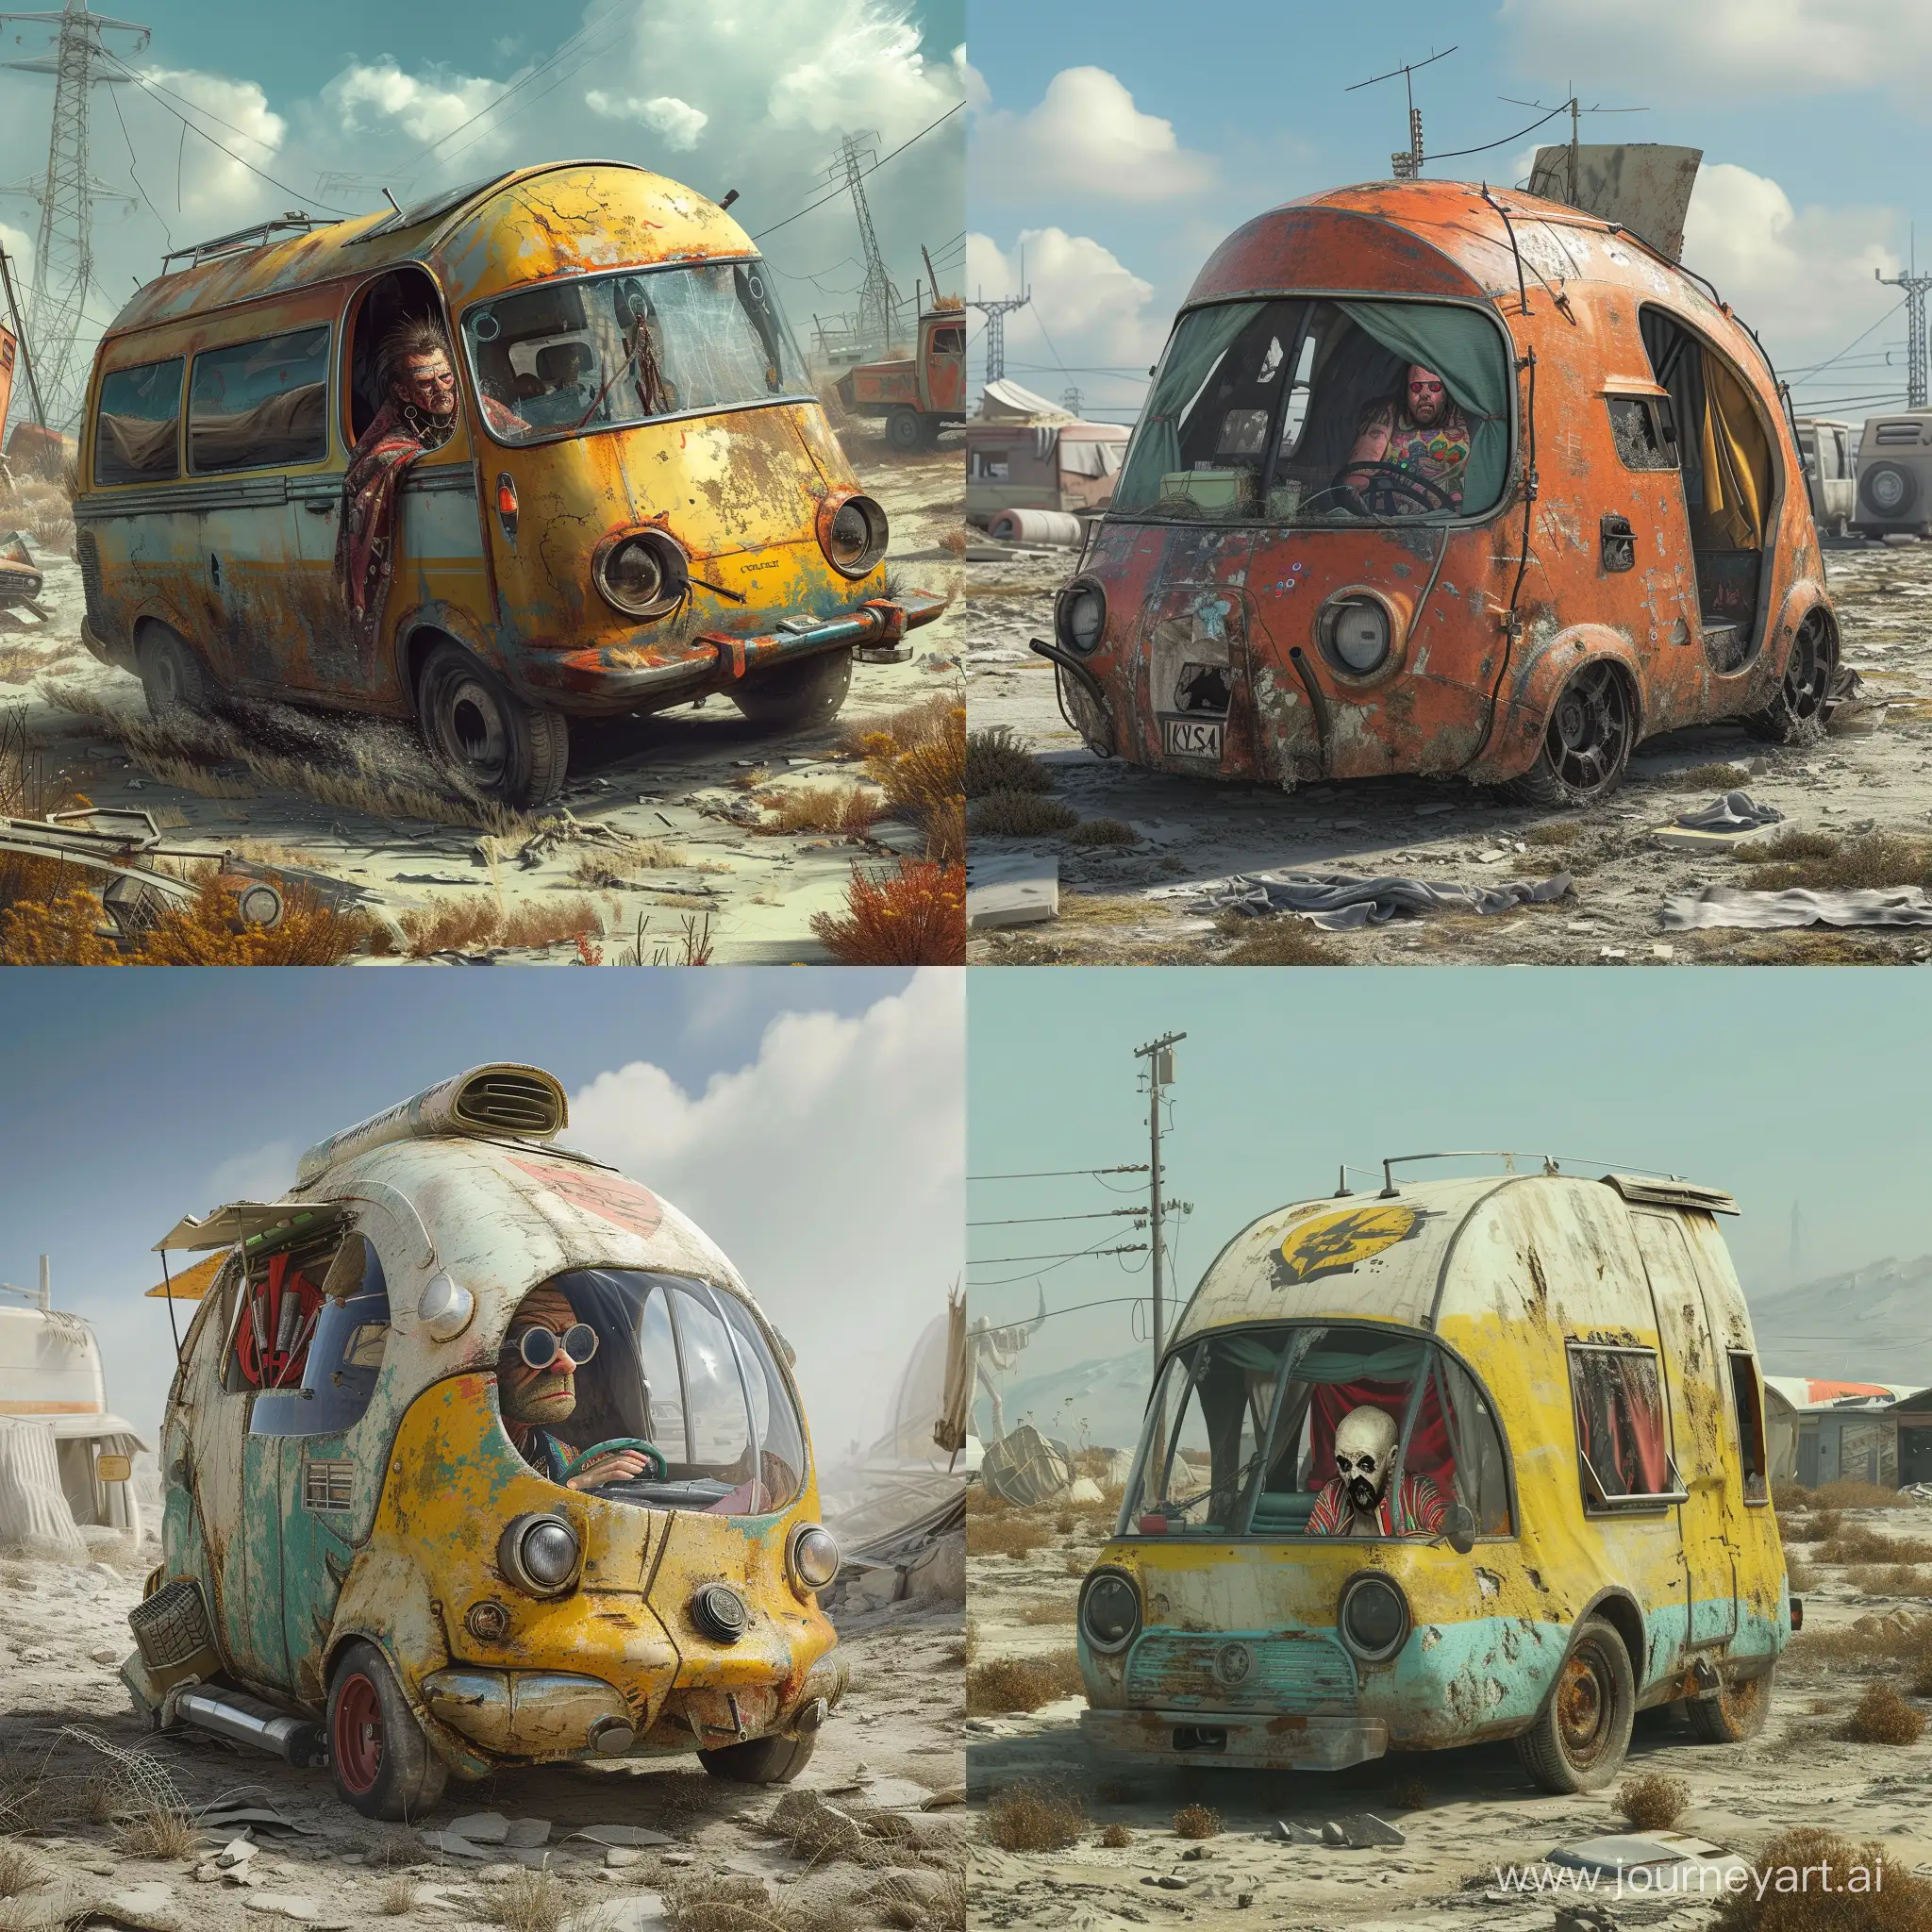 /imagine prompt:
Generate a highly realistic image of the protagonist, a raver and lone traveler, in a post-apocalyptic setting. The protagonist is inside a distinctive camping car, navigating through a desolate landscape. Emphasize the character's unique features, expressive facial expressions, and attire that reflects the raver lifestyle. The environment should showcase the aftermath of destruction, with abandoned structures and a sense of desolation. Capture the atmosphere of solitude and resilience as the protagonist journeys through the apocalyptic world.
